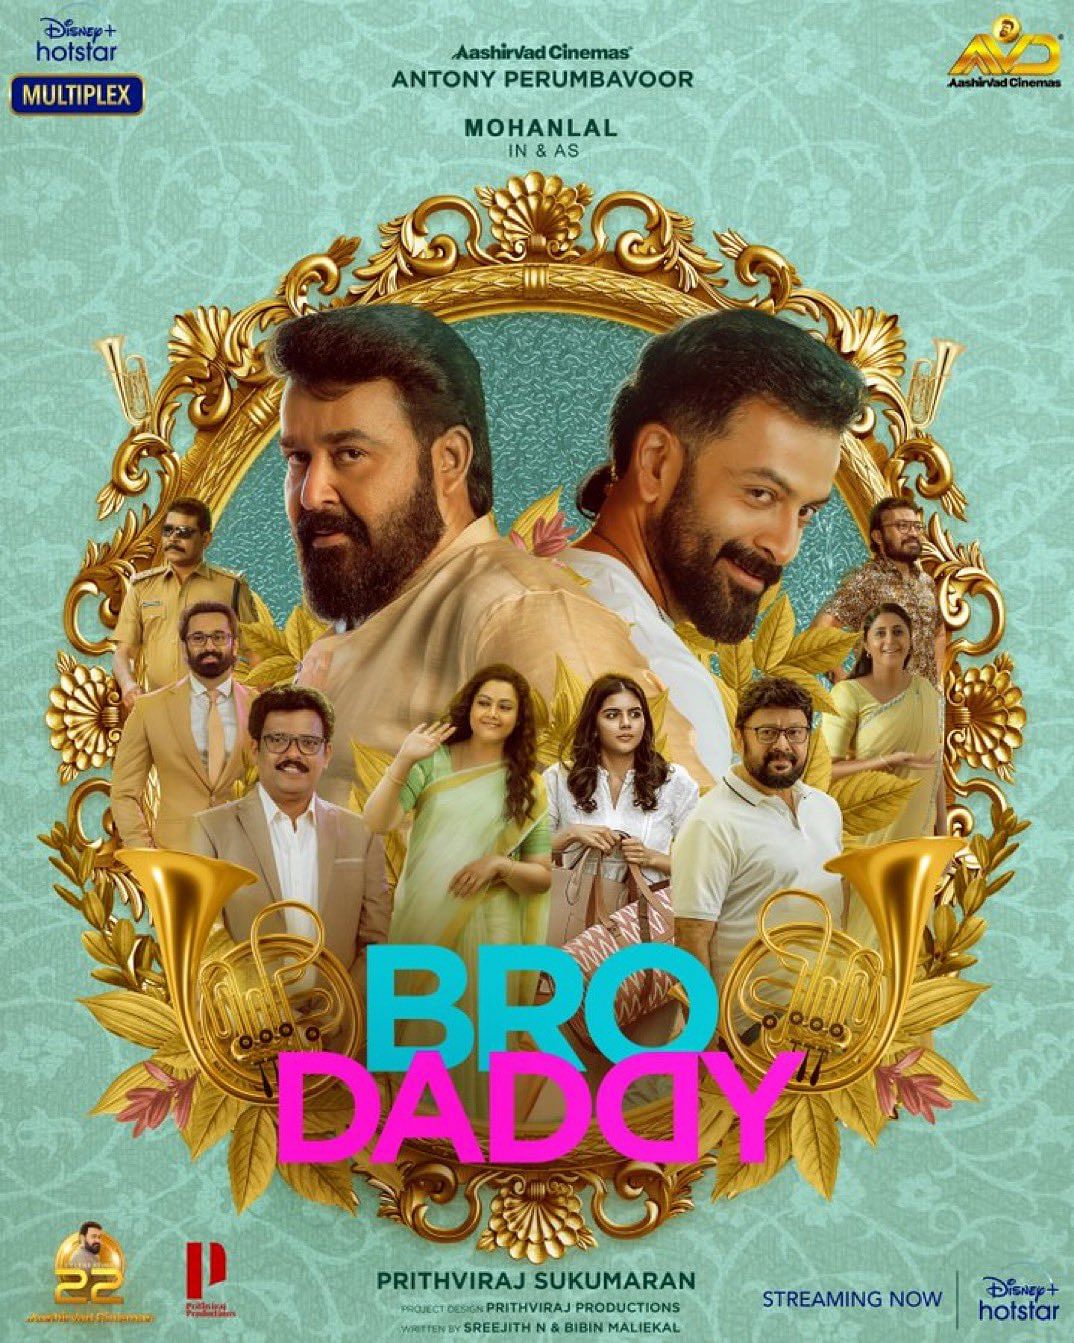 Bro Daddy movie review: An average entertainer